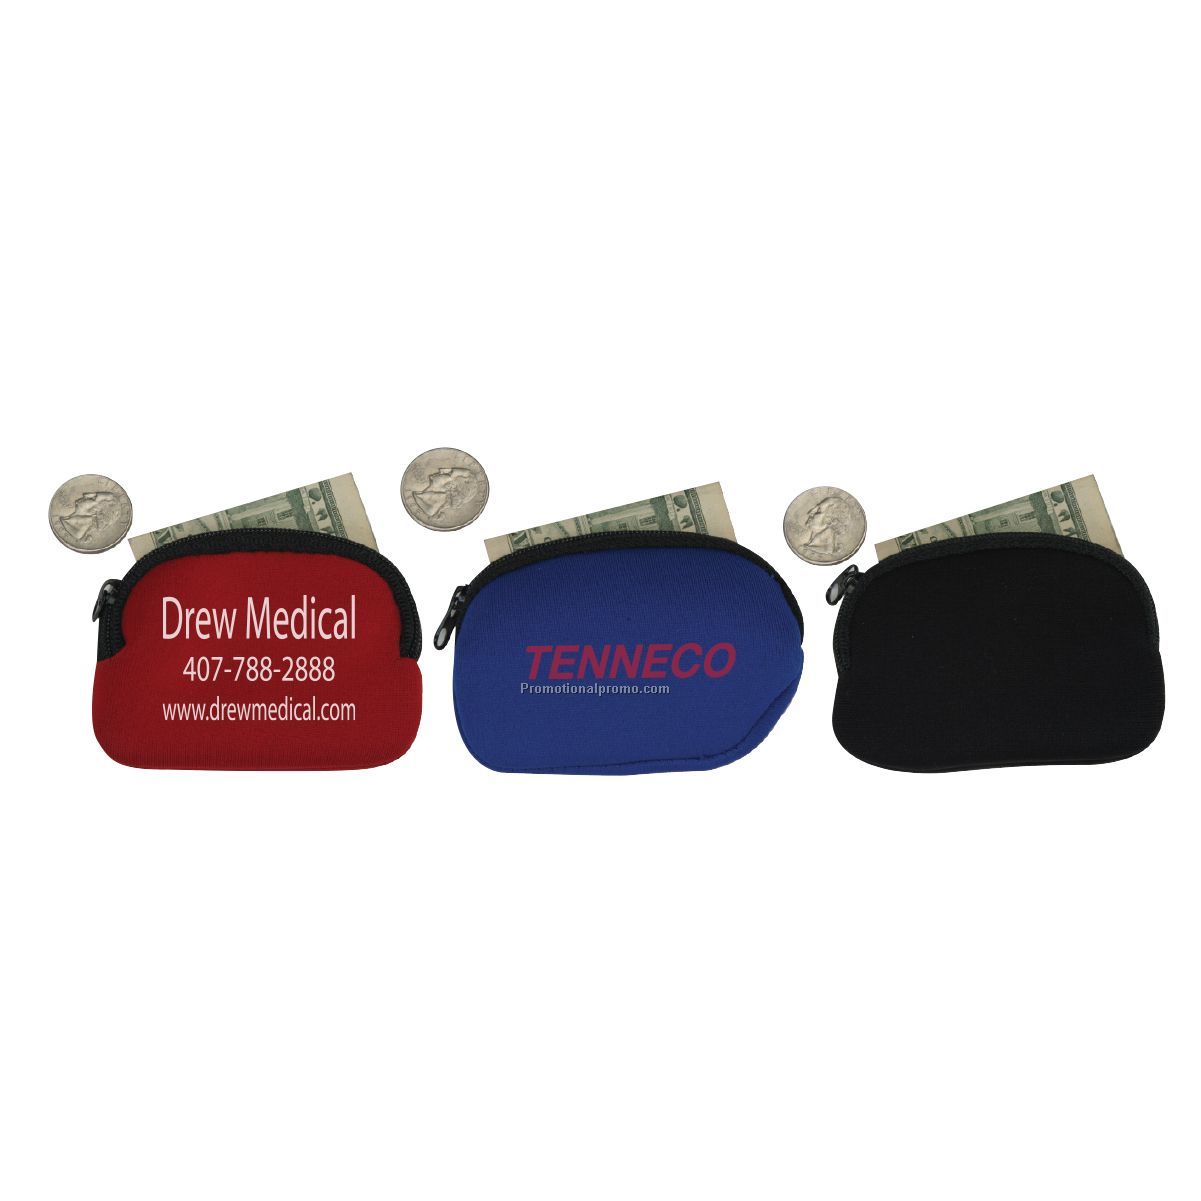 4MM neoprene zippered coin pouch for kids.  4" L x 3" W